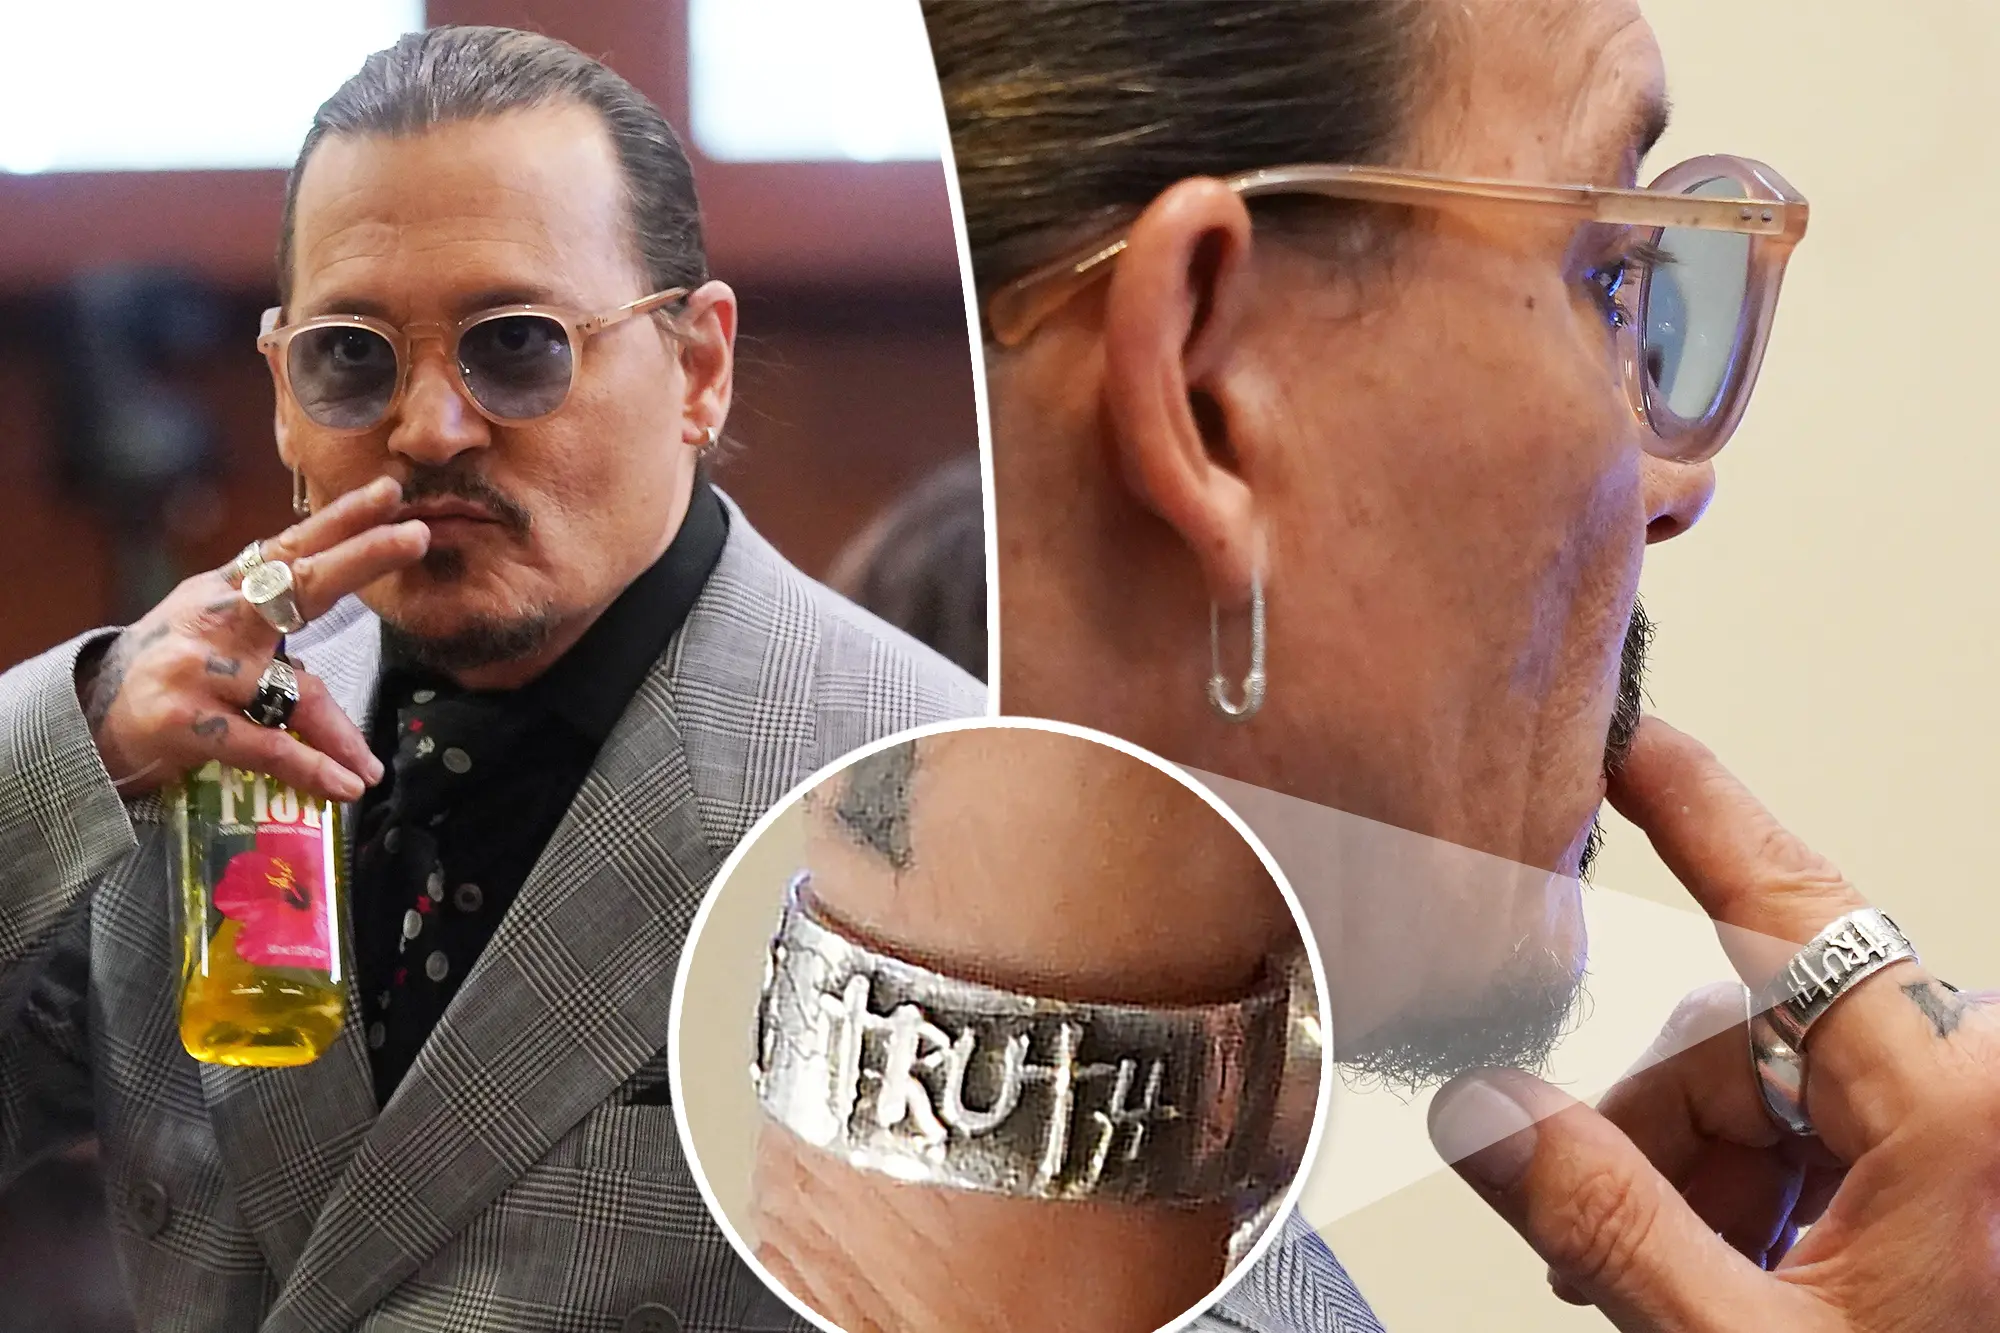 Johnny Depp Appears On Trial While Wearing A “Truth” Ring.